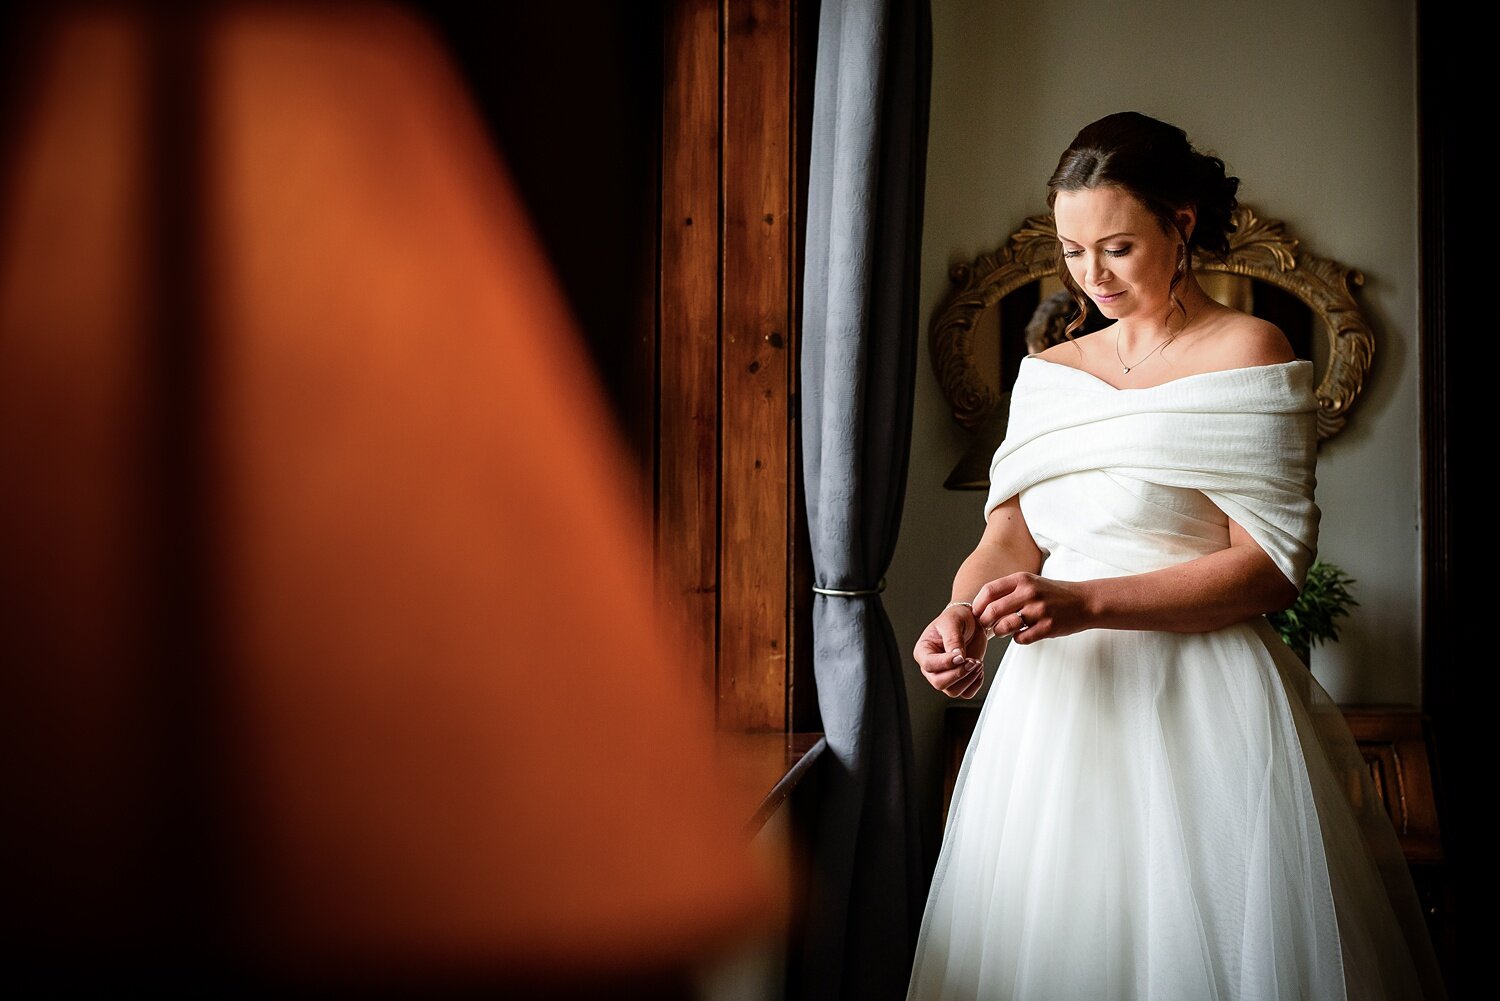 Bride gets ready for her wedding